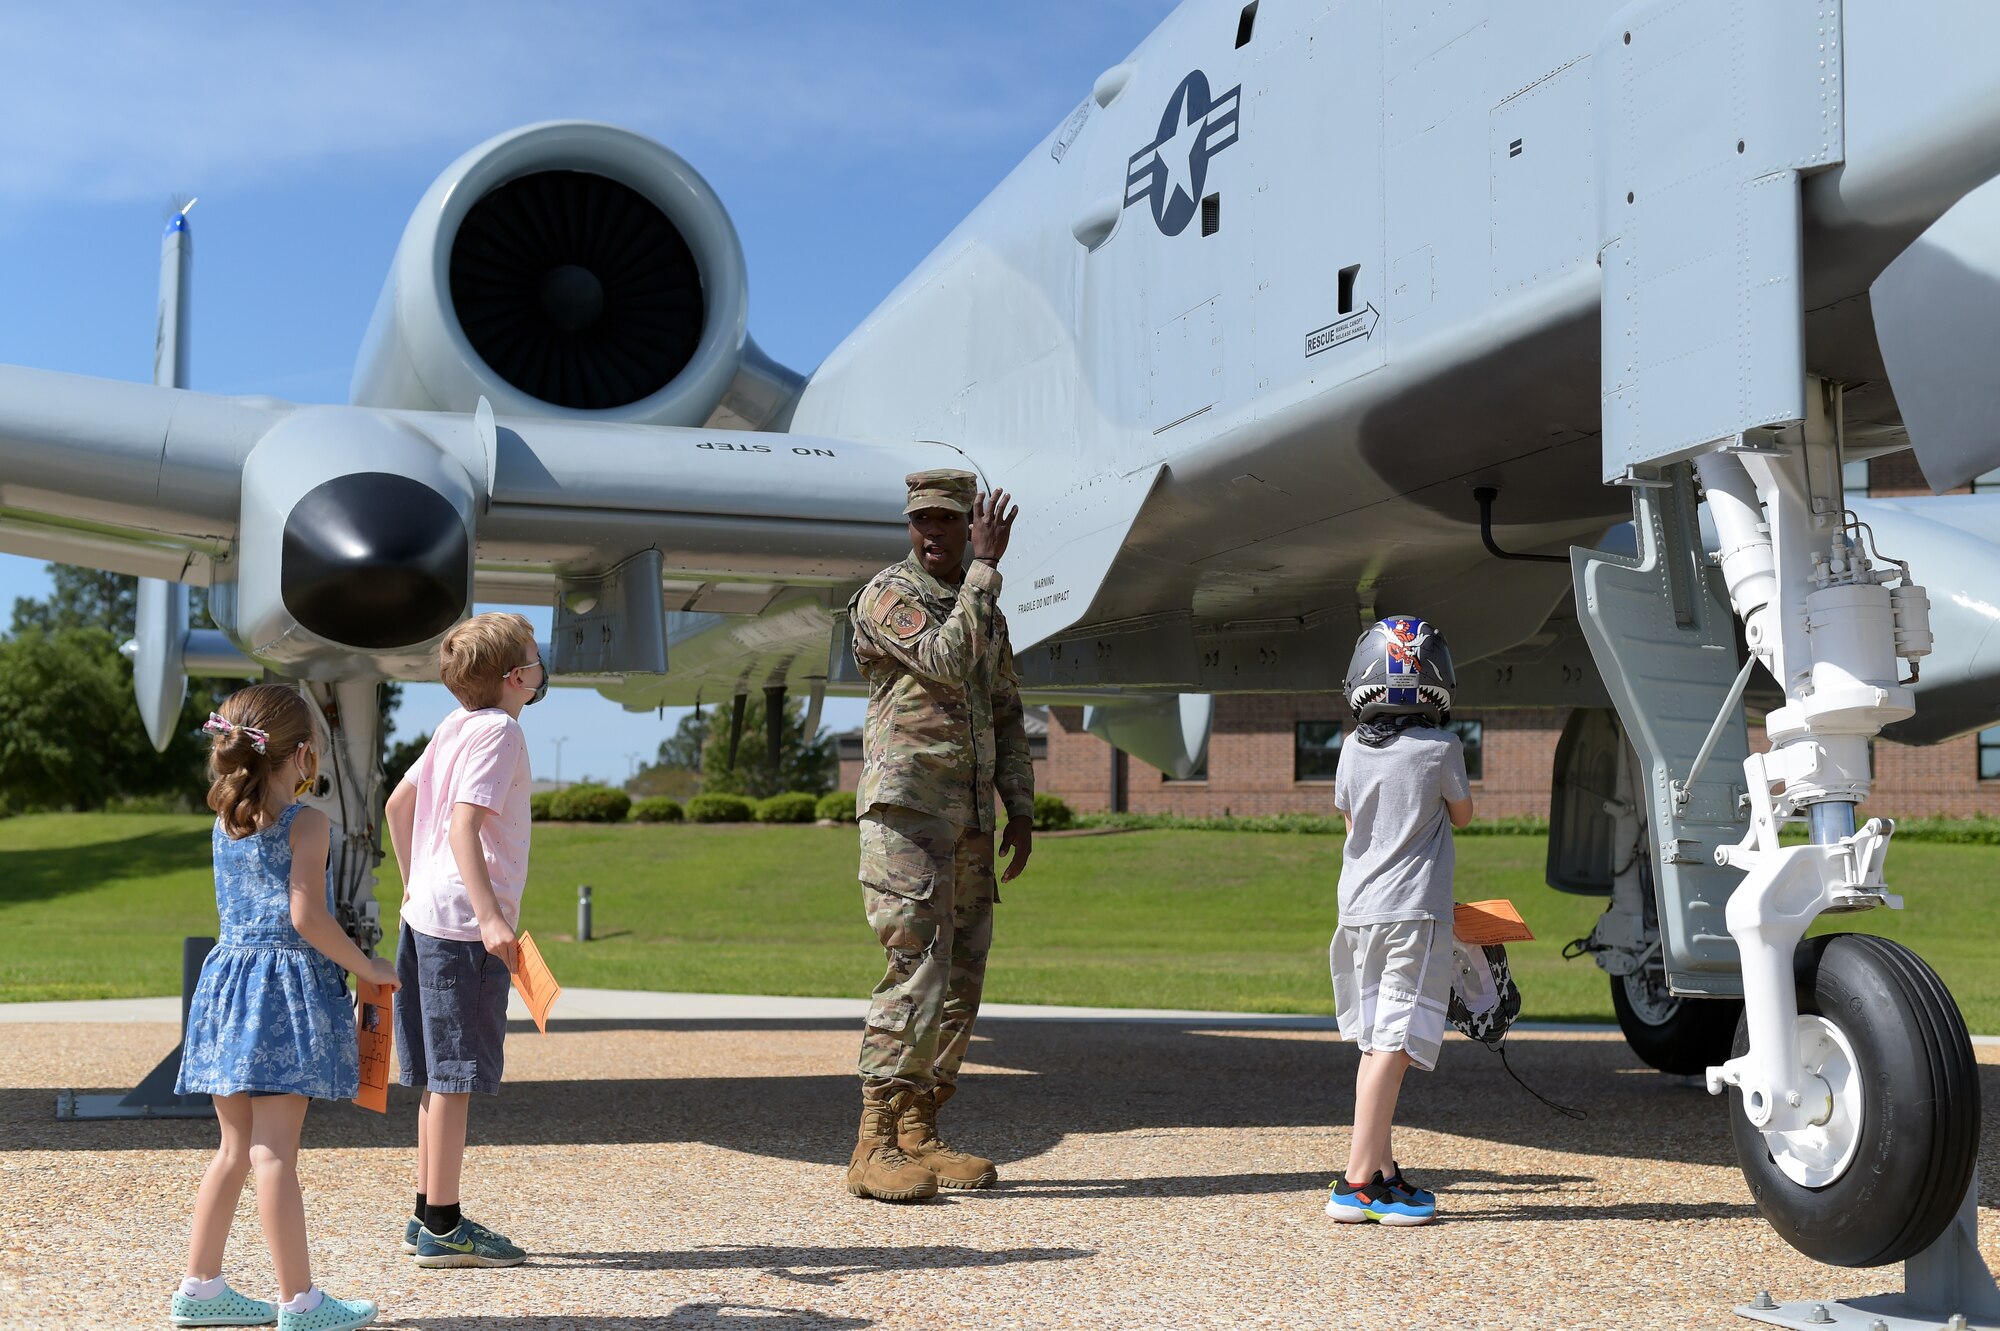 Airman talking to kids about A-10 attack aircraft